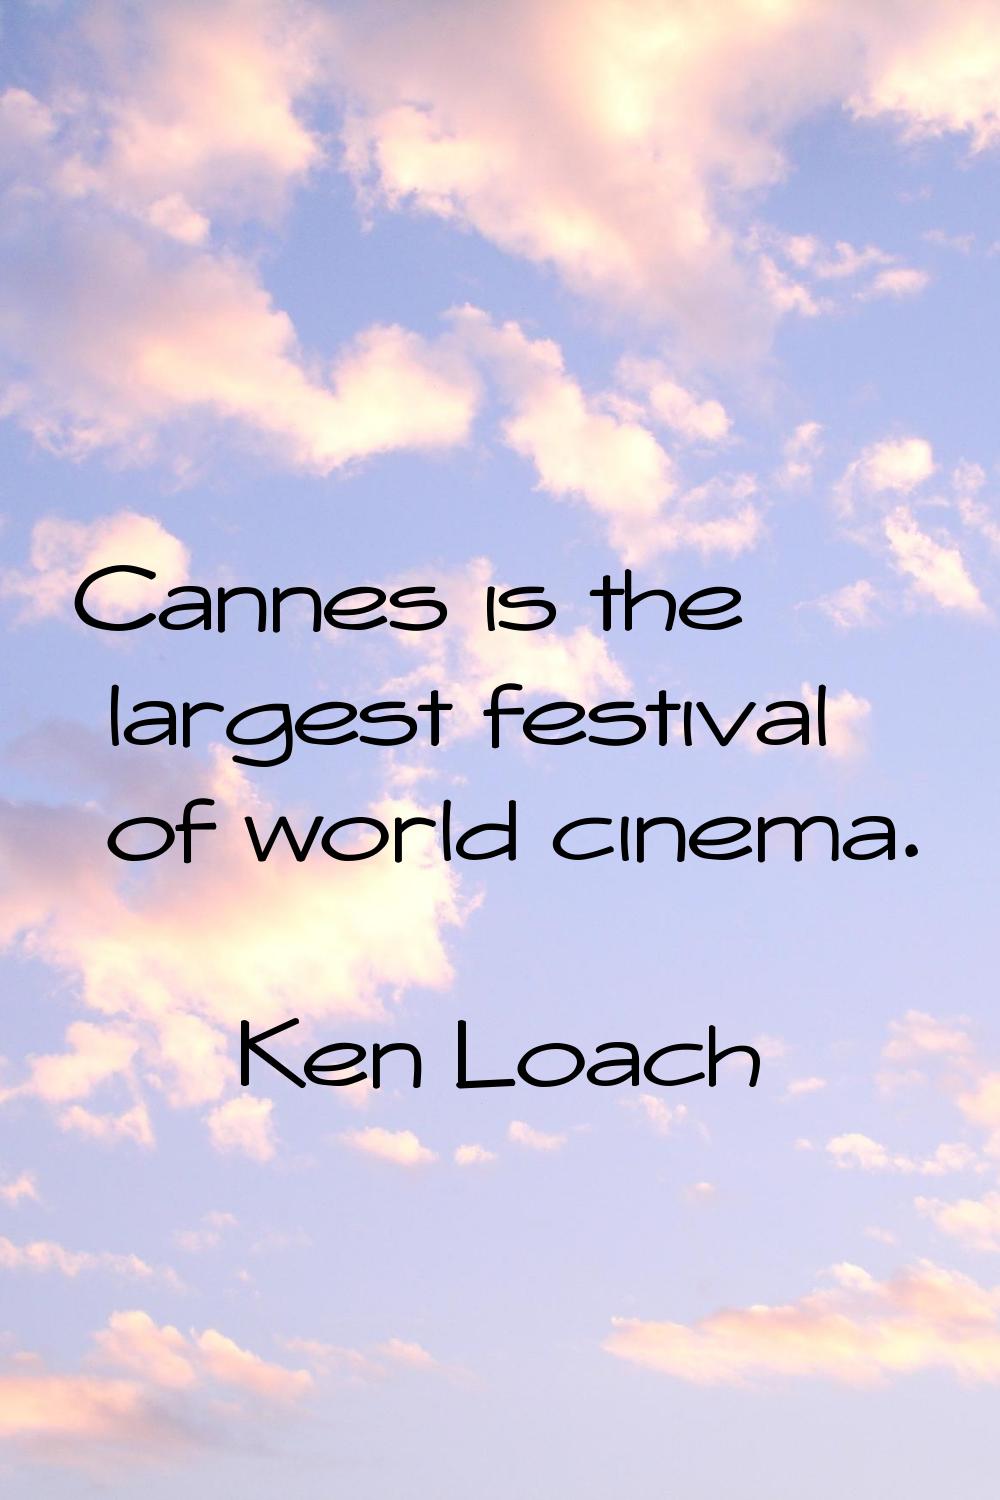 Cannes is the largest festival of world cinema.